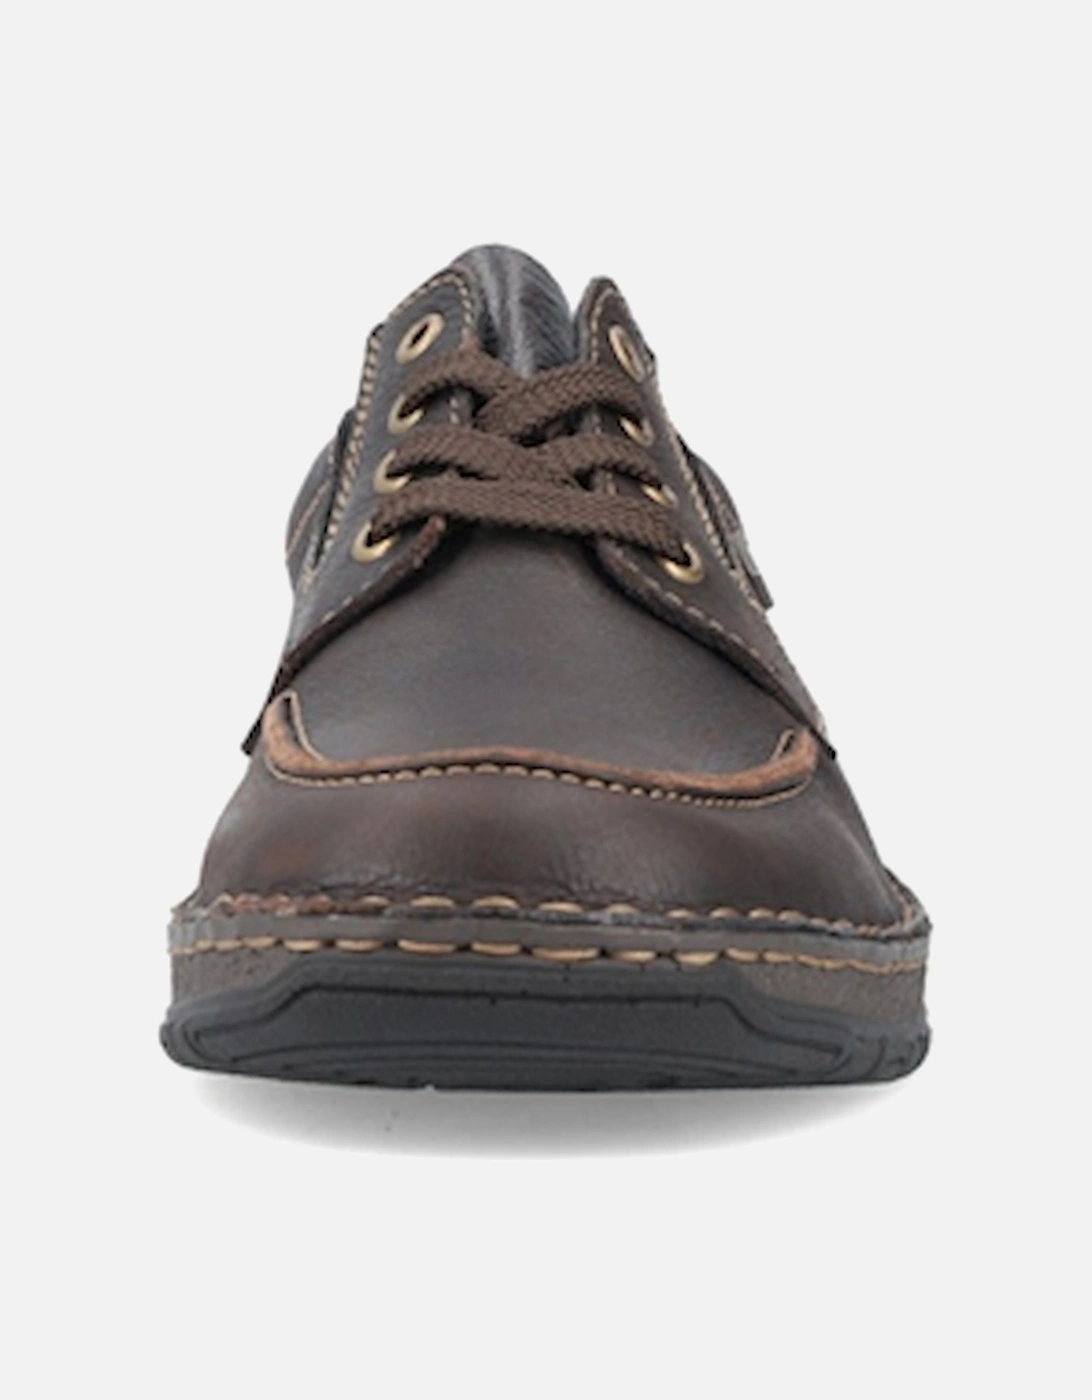 Men's 05100-25 Wide Fit Lace Up Casual Shoe Brown